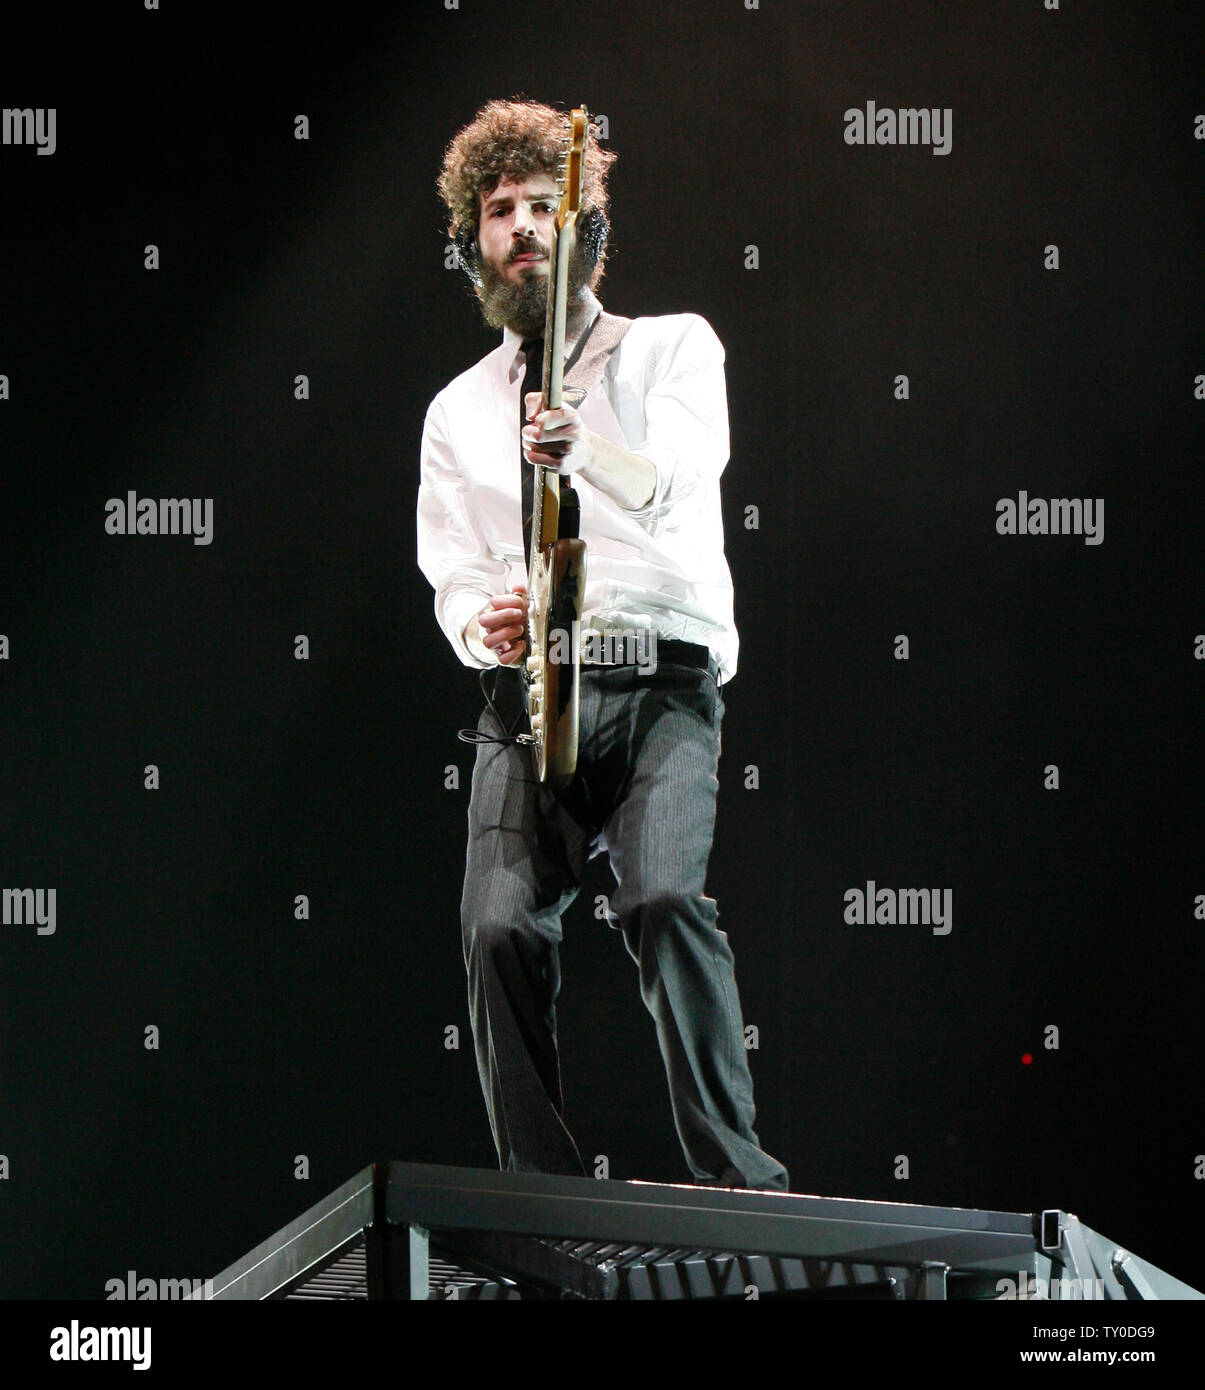 Linkin Park guitarist Brad Delson performs in concert at the Staples Center in Los Angeles on March 4, 2008.   (UPI Photo/David Silpa) Stock Photo